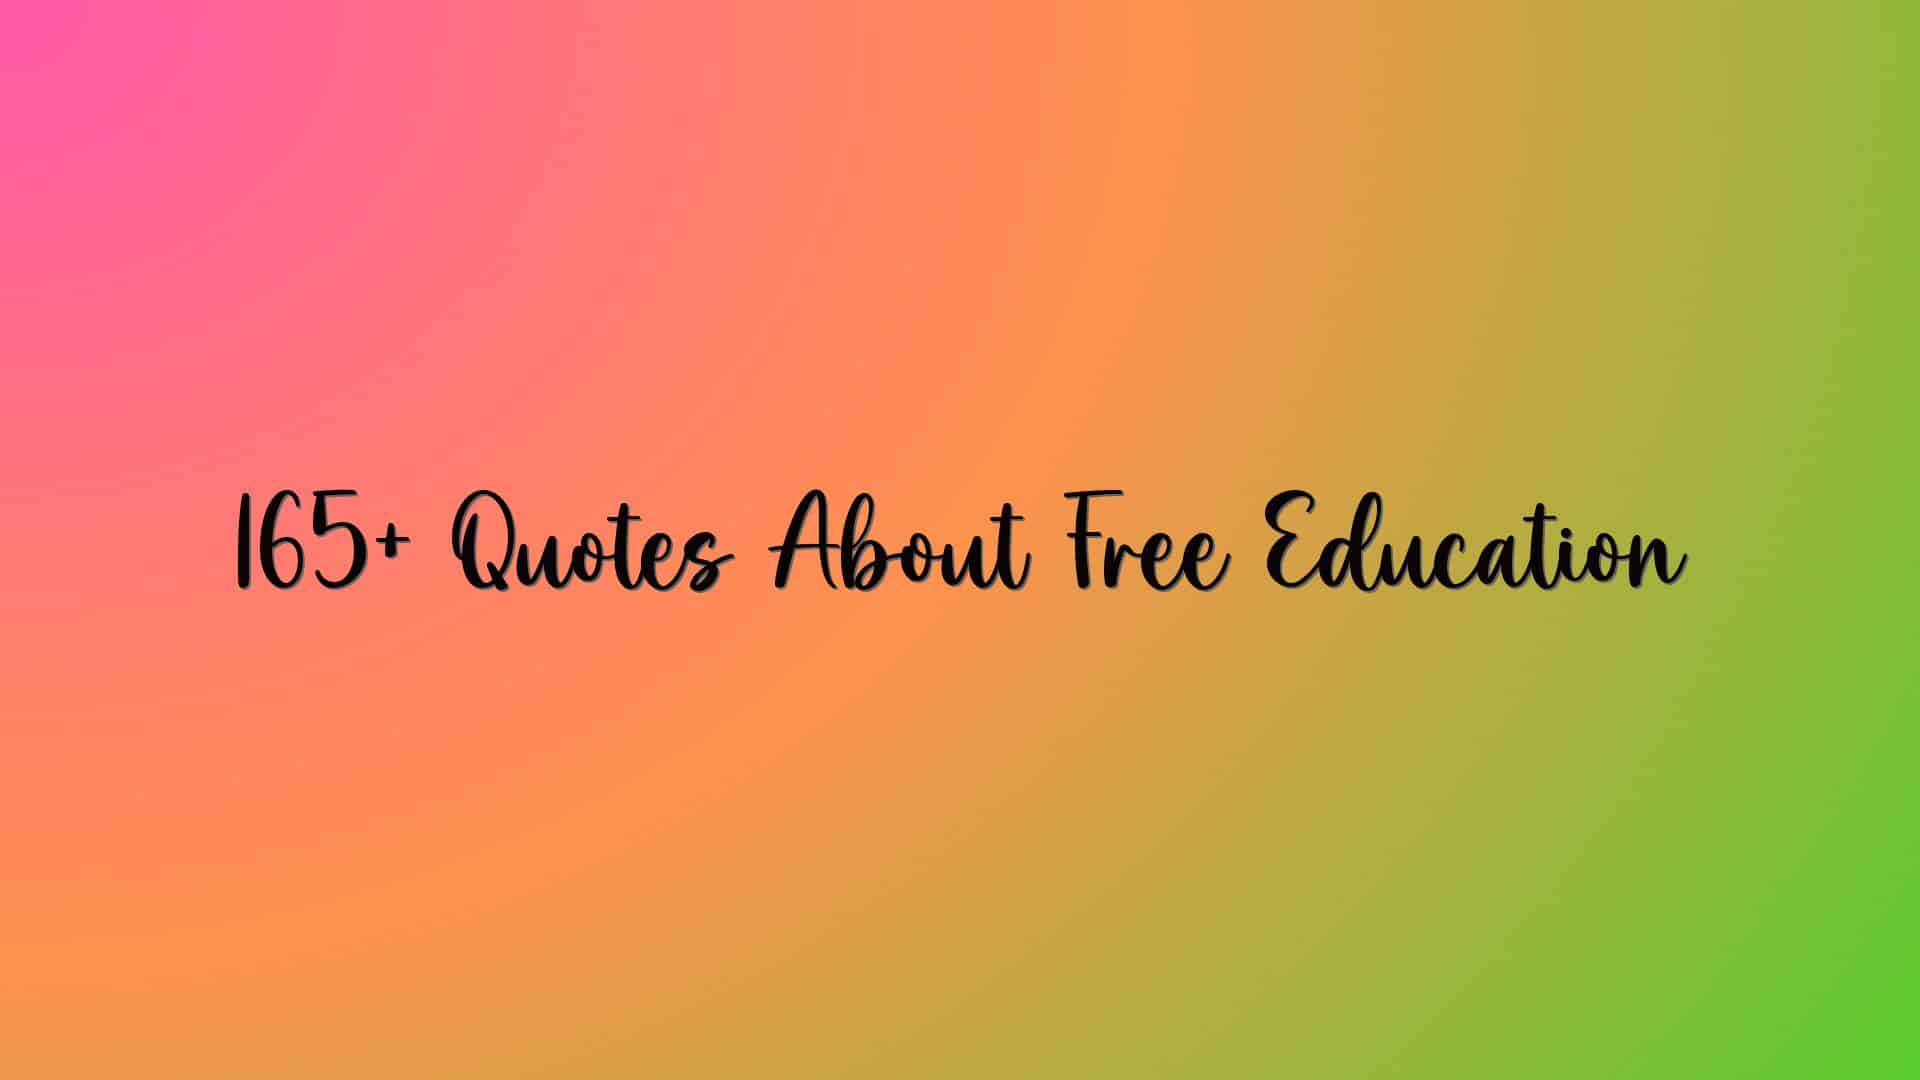 165+ Quotes About Free Education